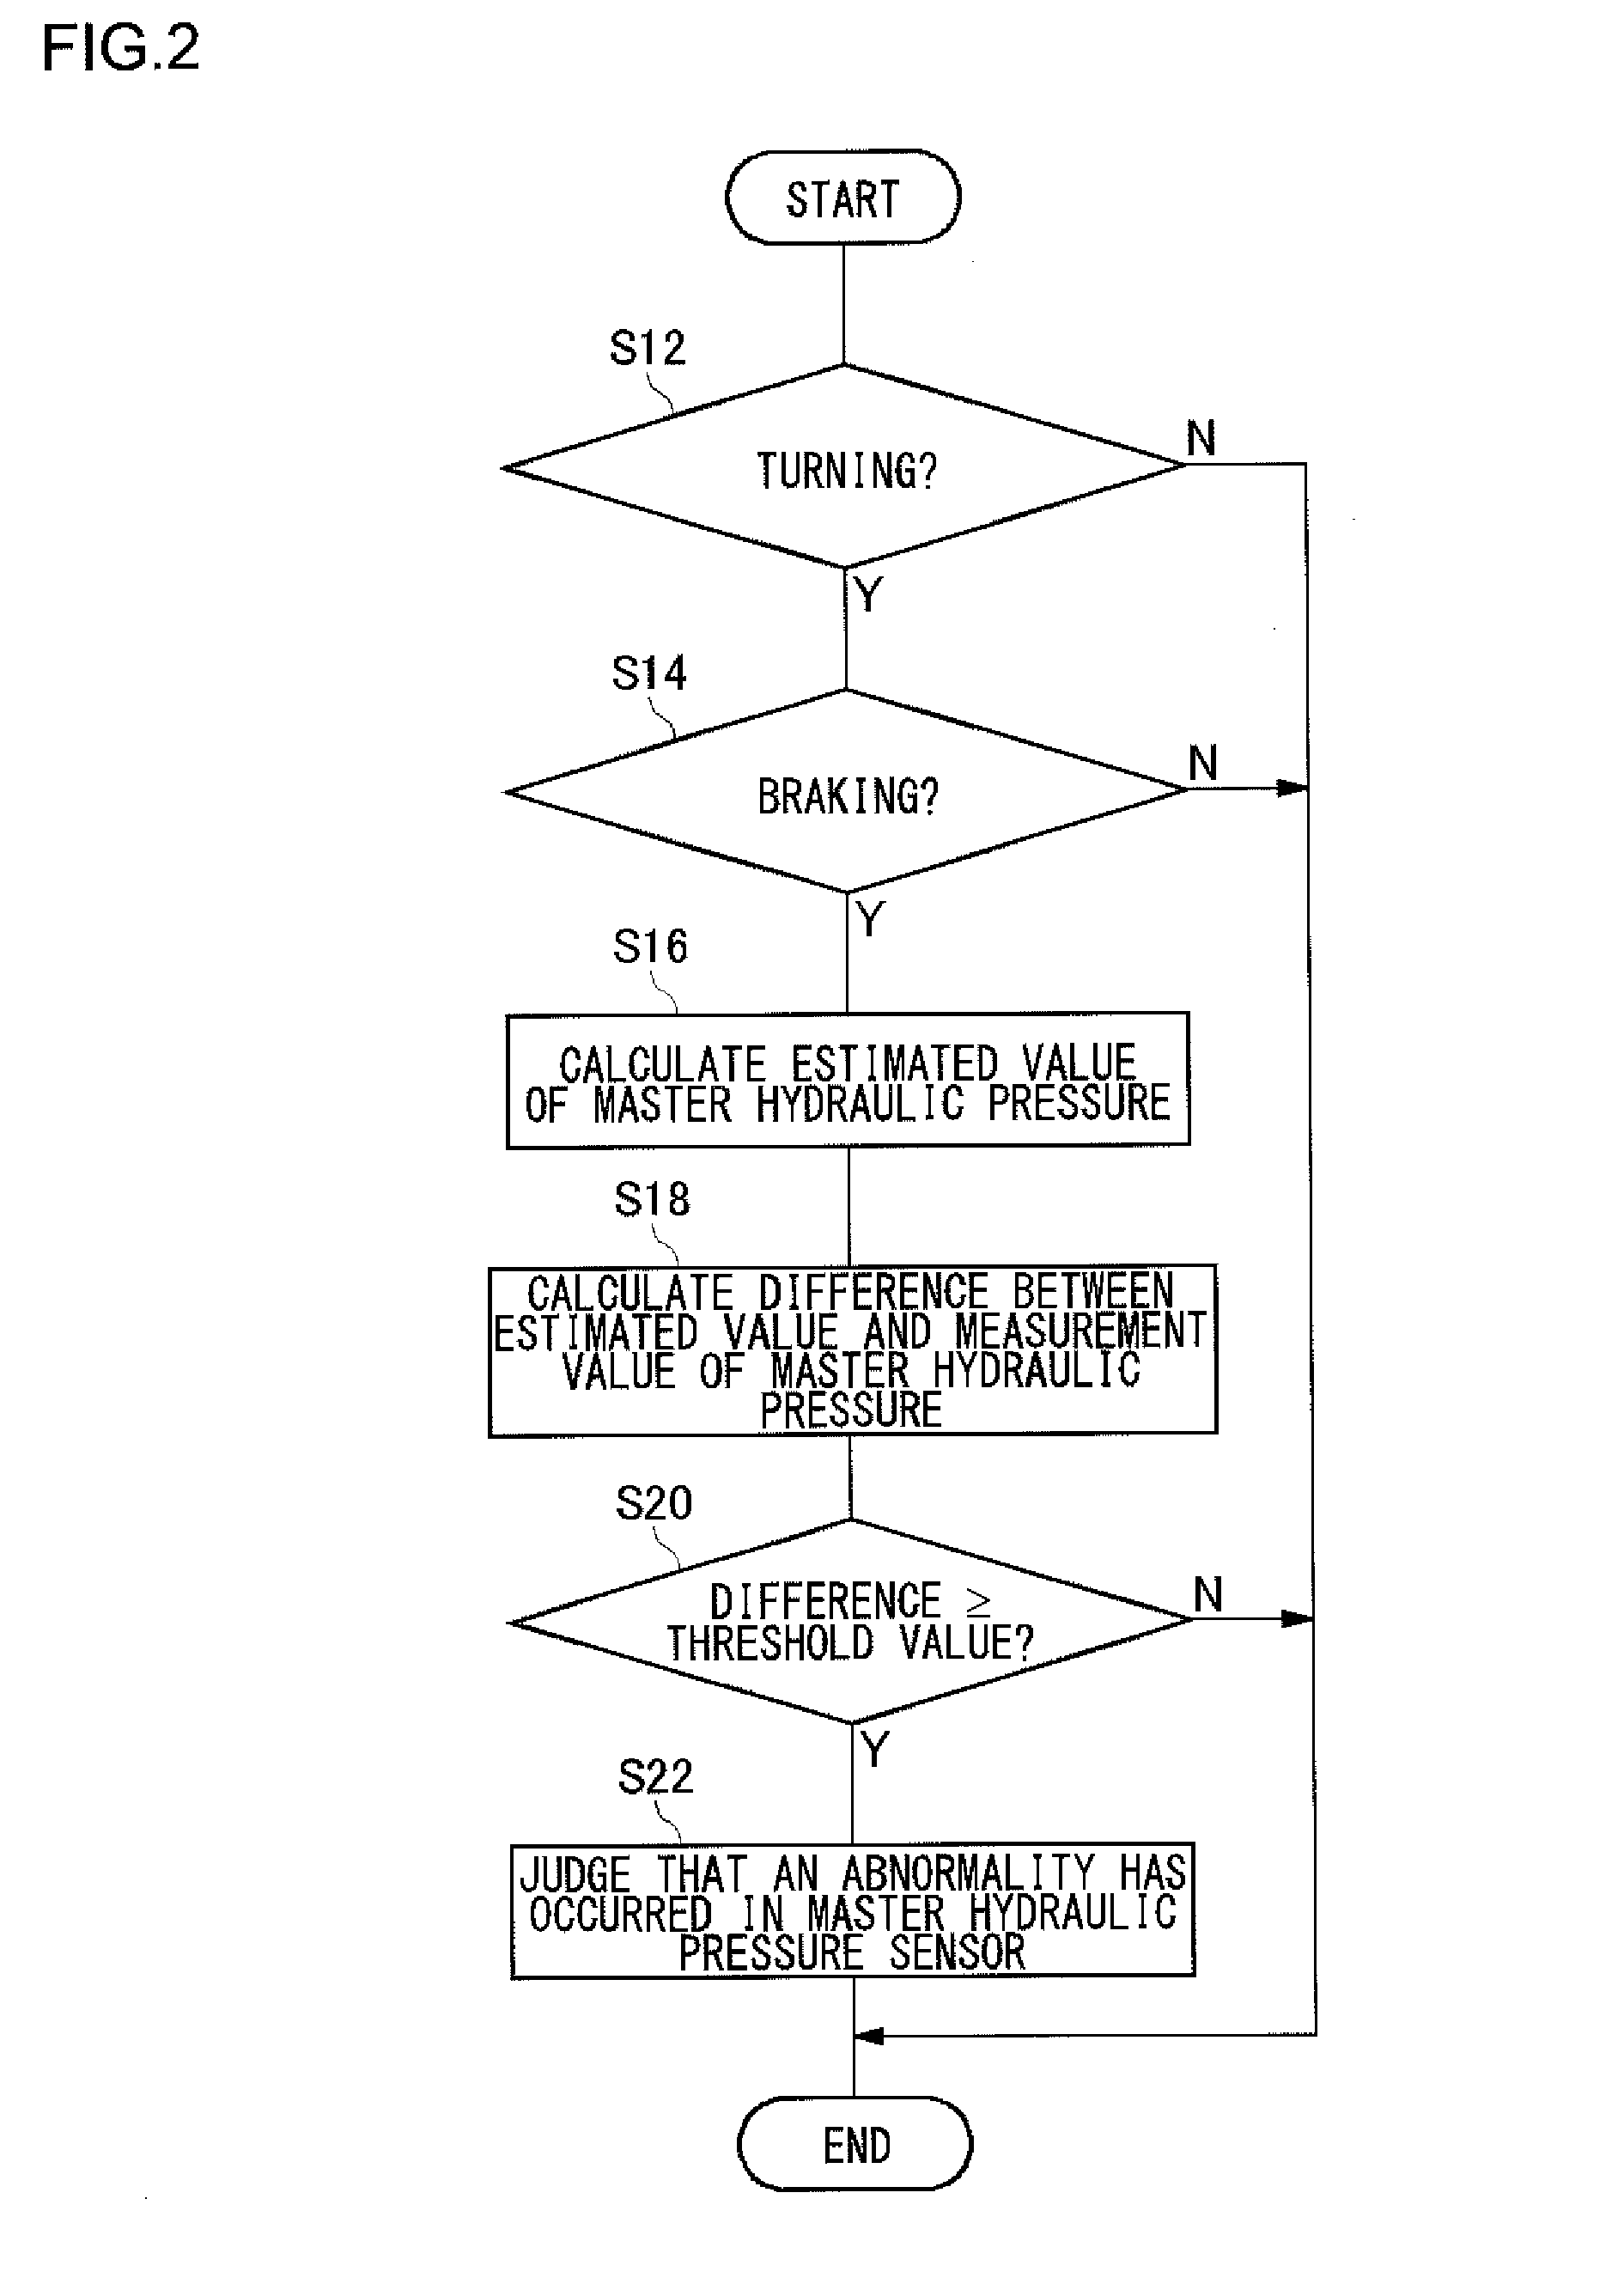 Abnormality detection apparatus for braking force detector